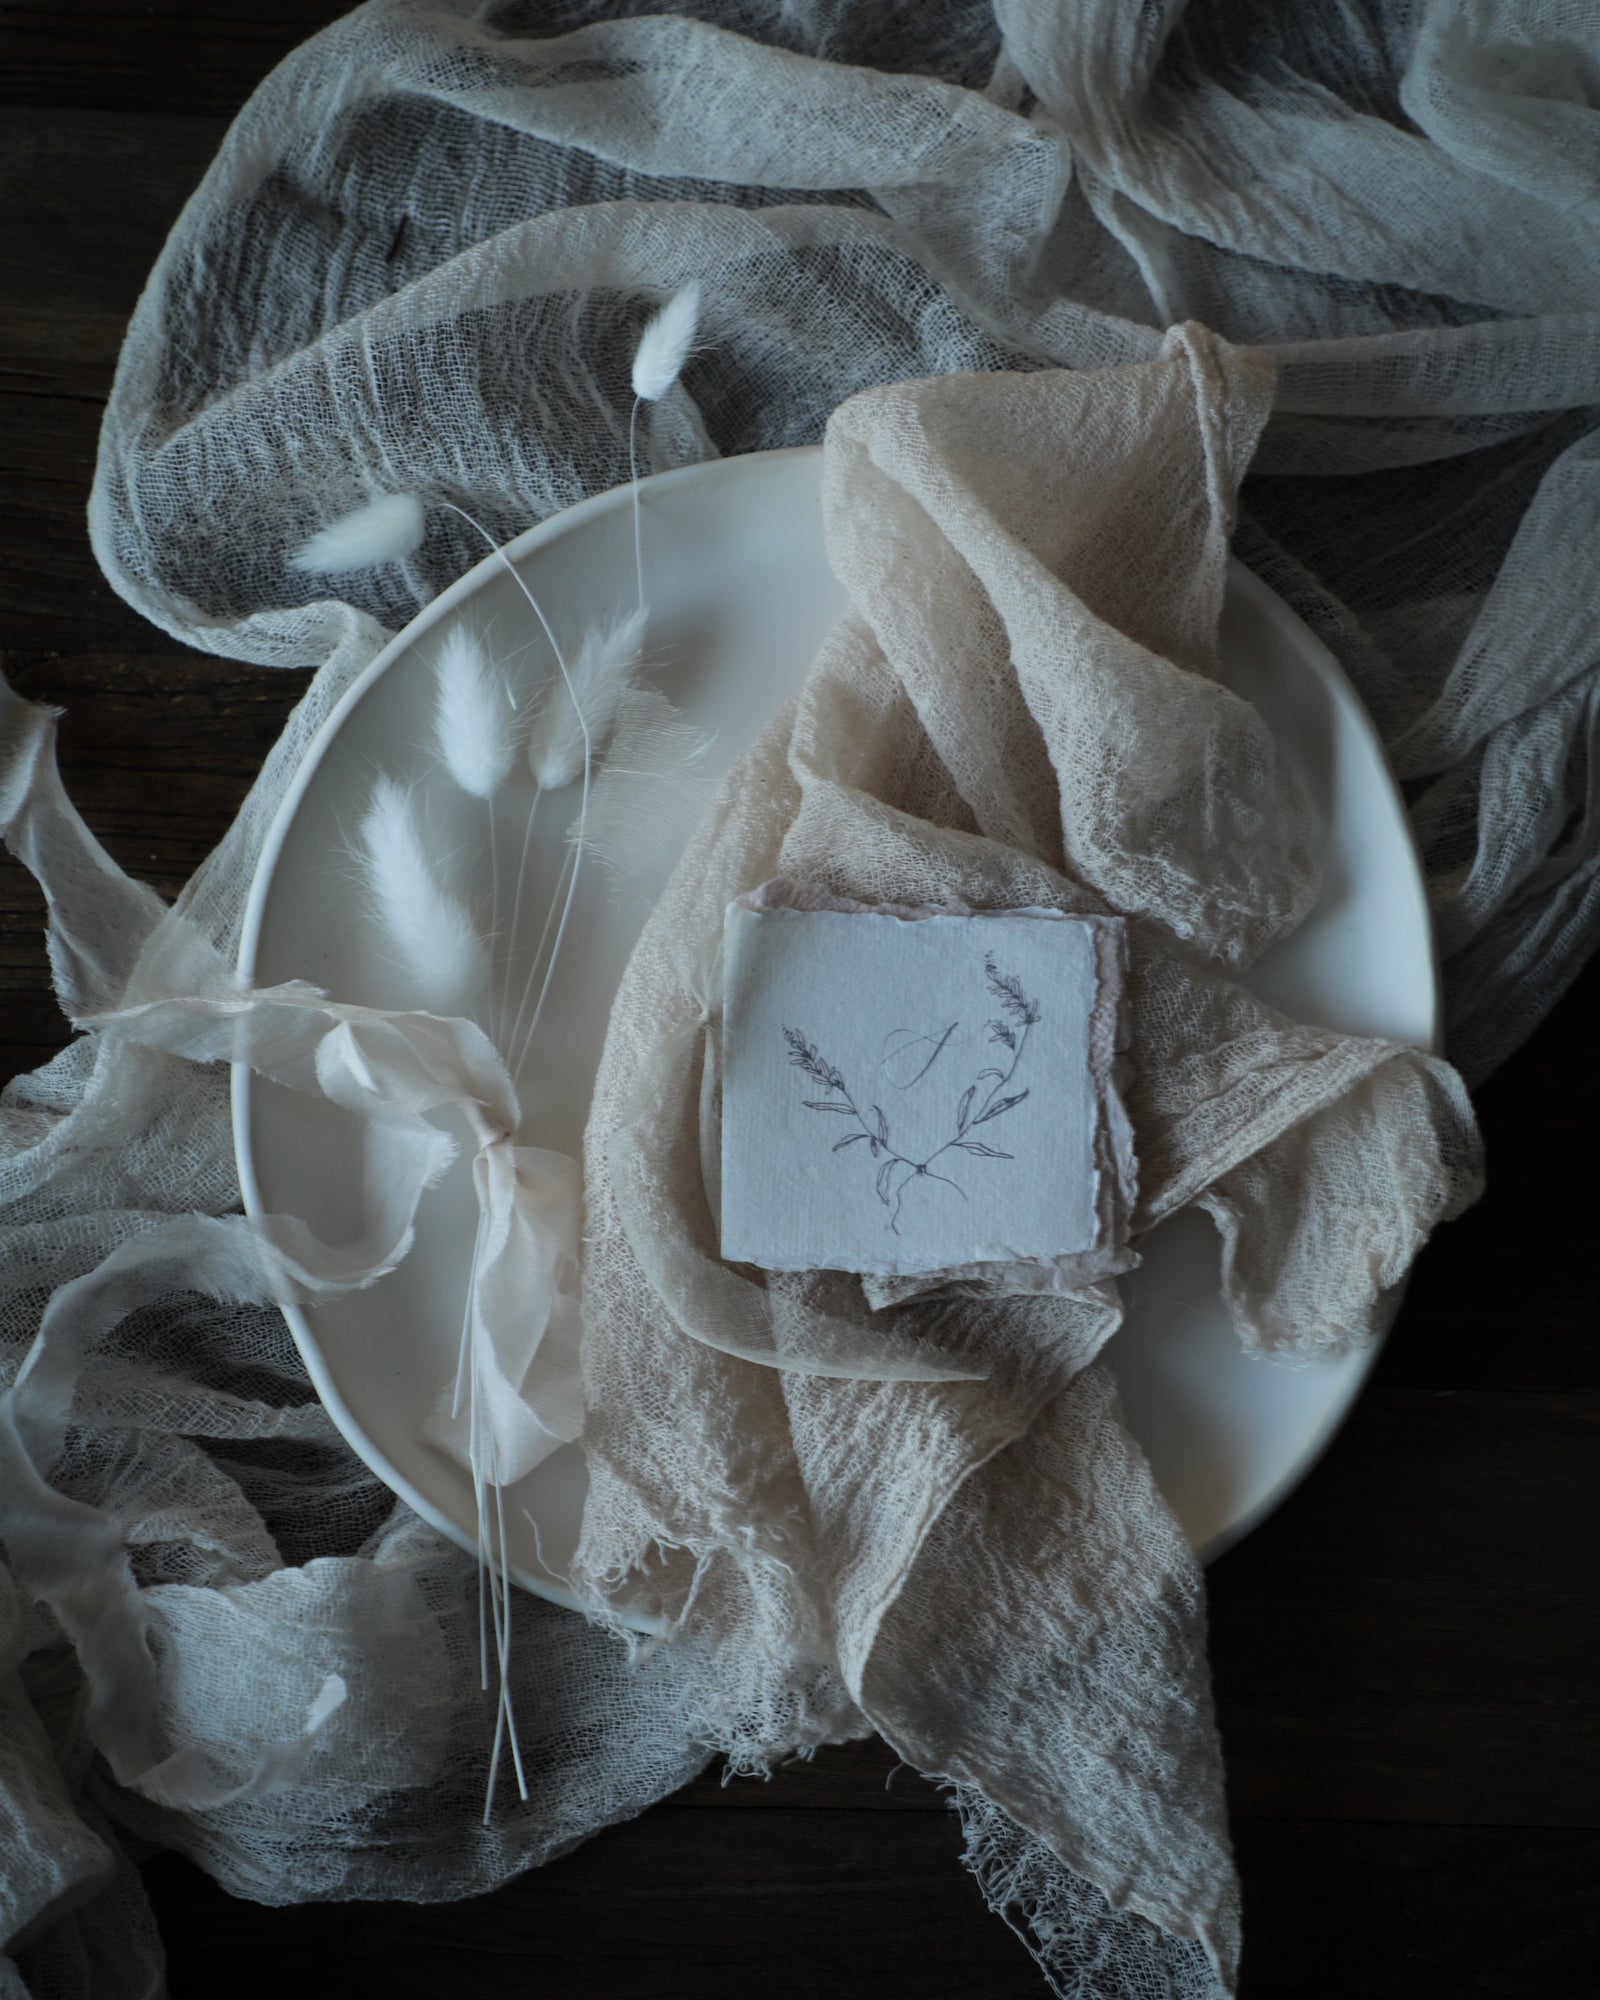 silk and willow table setting design with blush napkin, antique white table runner and white ceramic plates